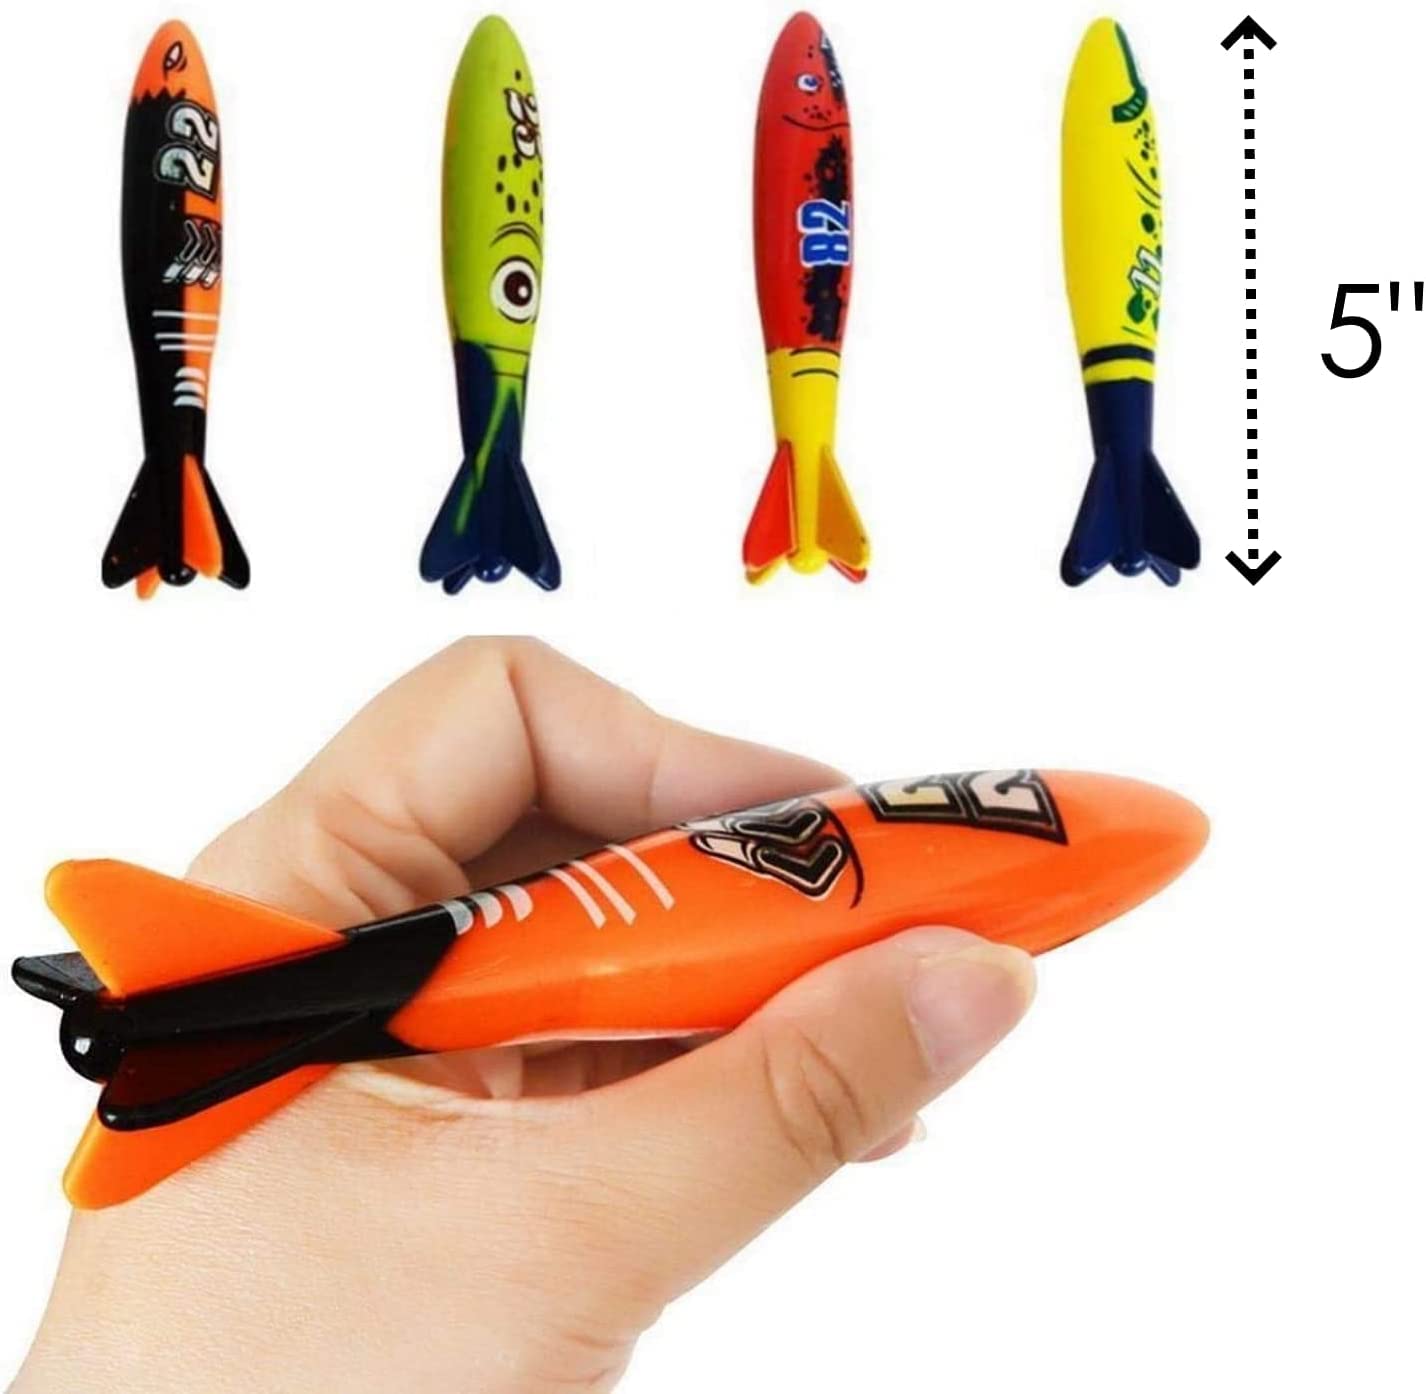 Haktoys Underwater Diving Torpedo Bandits, Swimming Pool Toy 5” Sharks Glides Up to 20 Feet Fun Water Games for Boys and Girls (Set of 8 Pieces) Multicolor Torpedoes